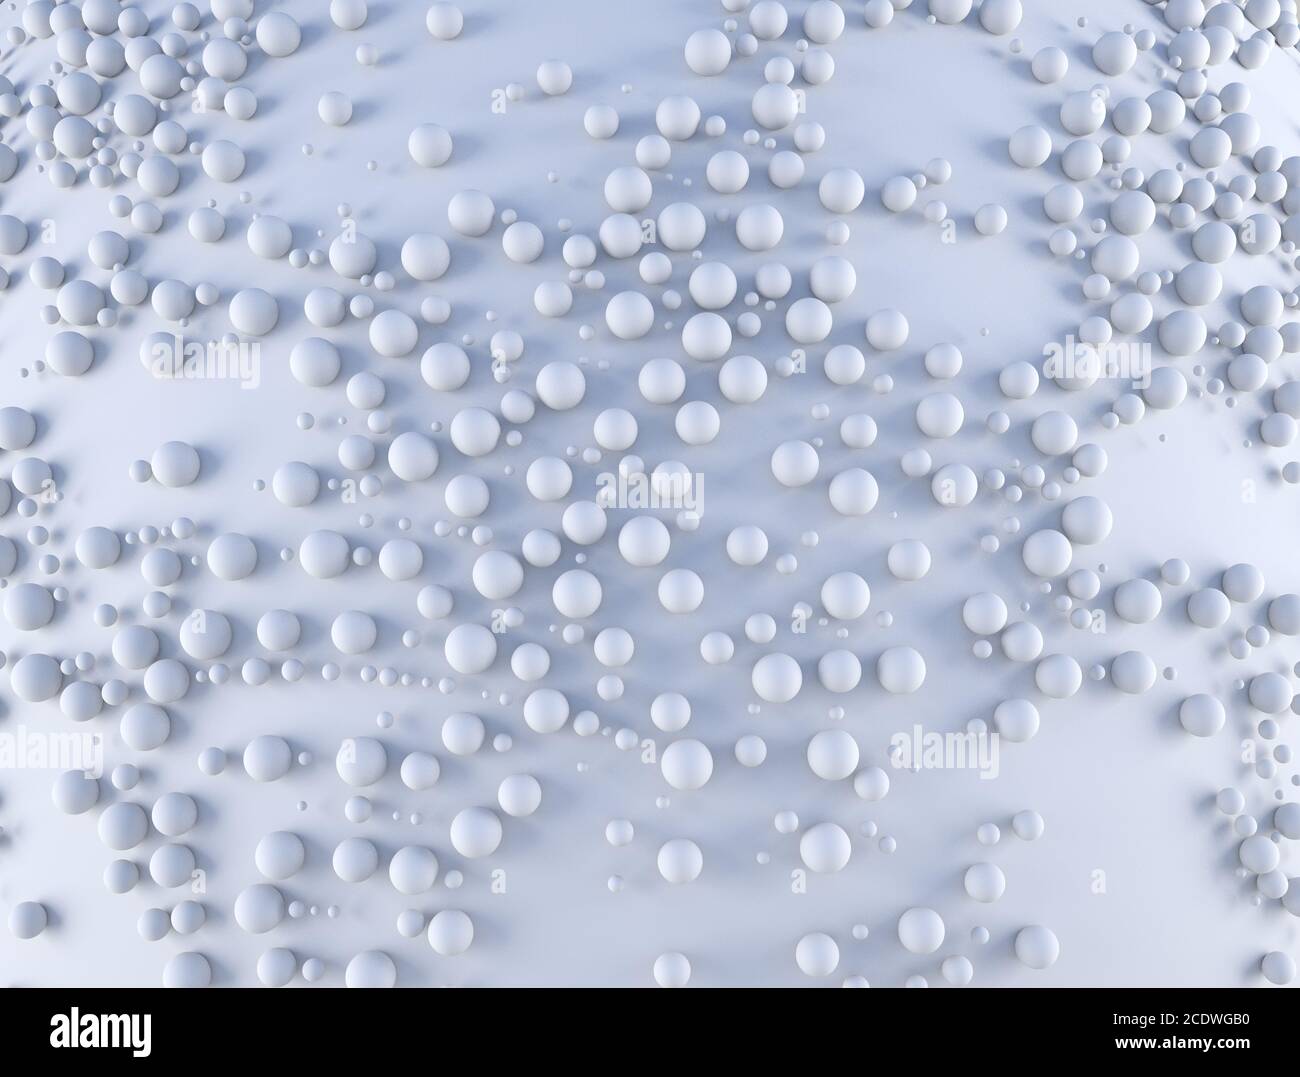 Abstract background with a lot of spheres with random scale on the white plane. 3d render illustraion Stock Photo